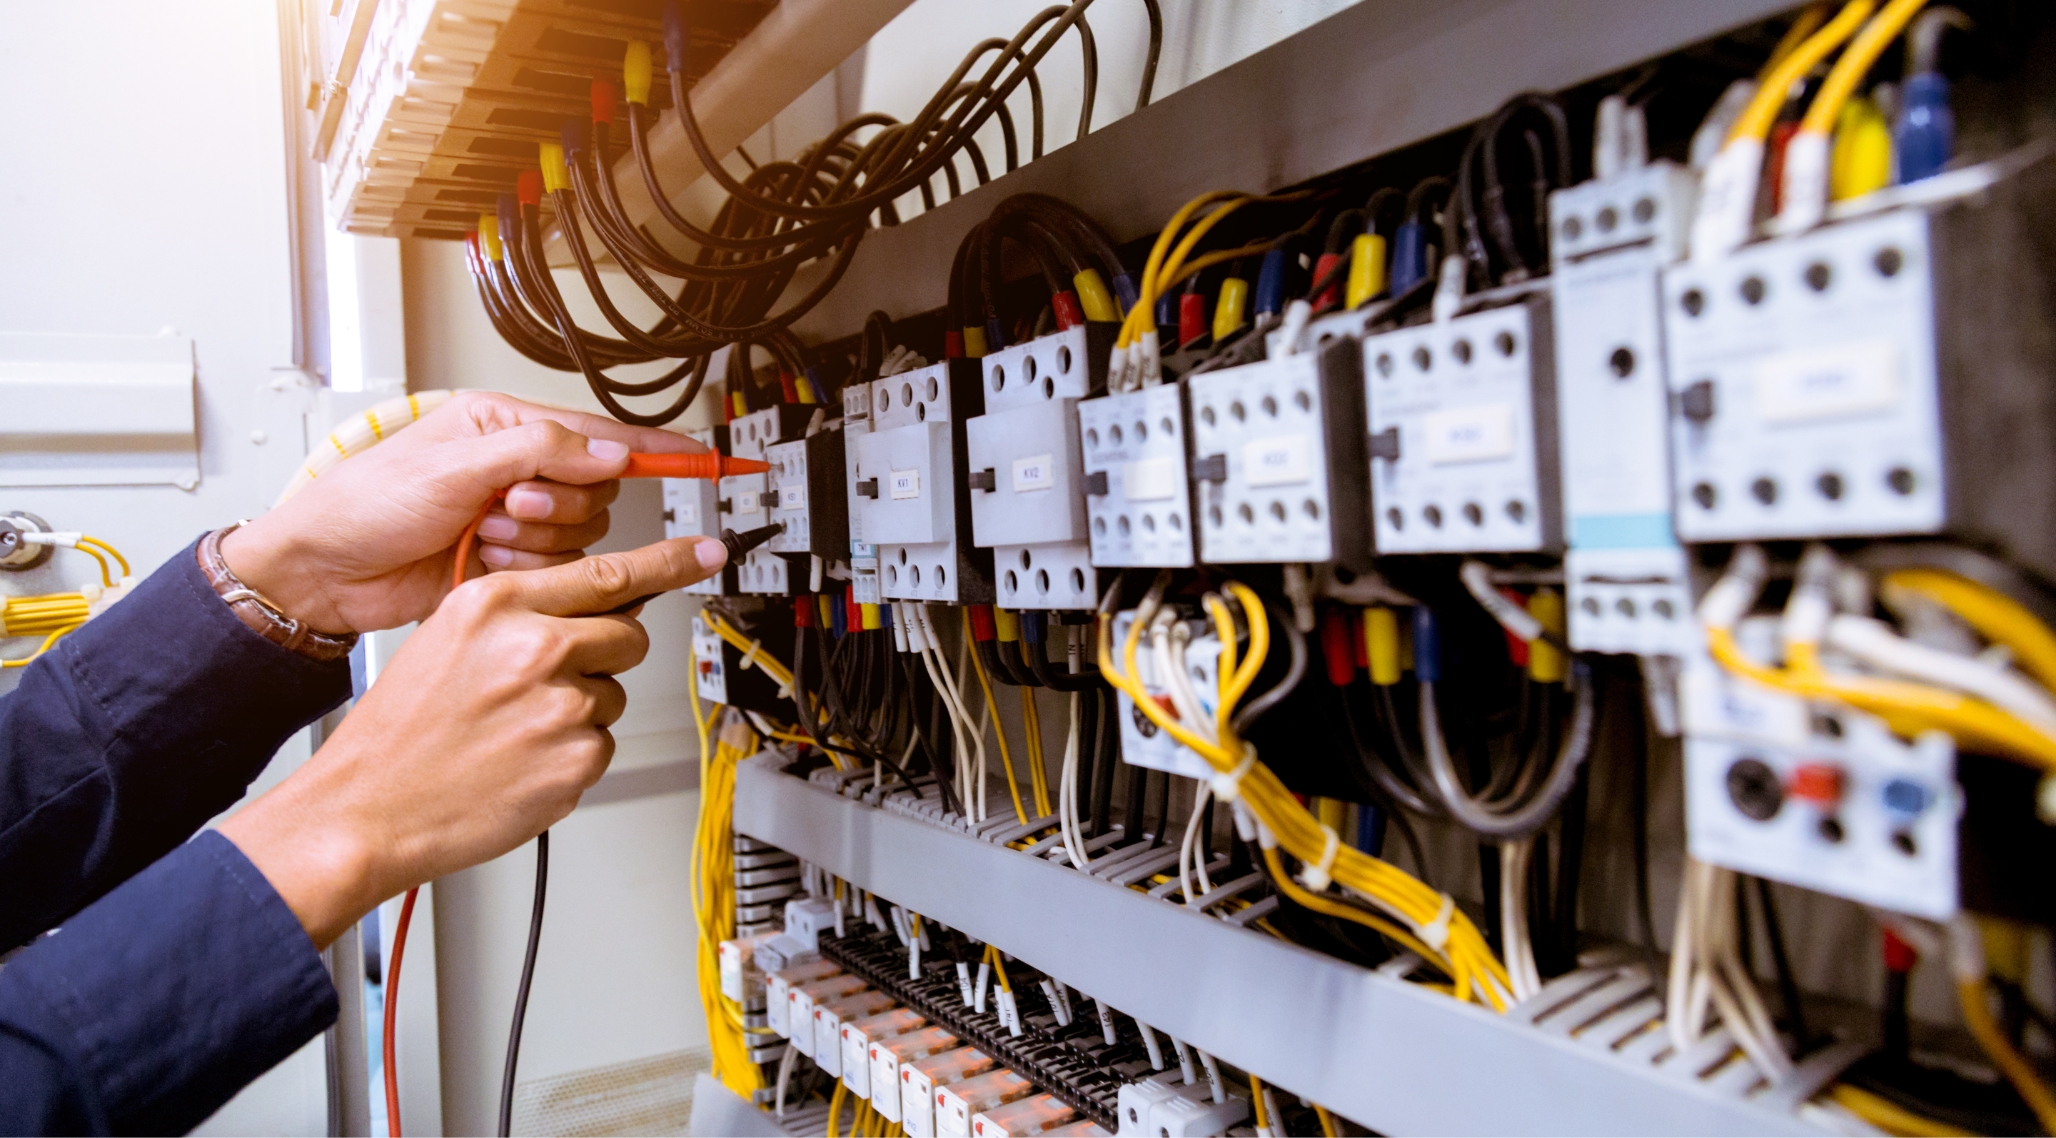 Why should you hire electricians in Palo Alto?